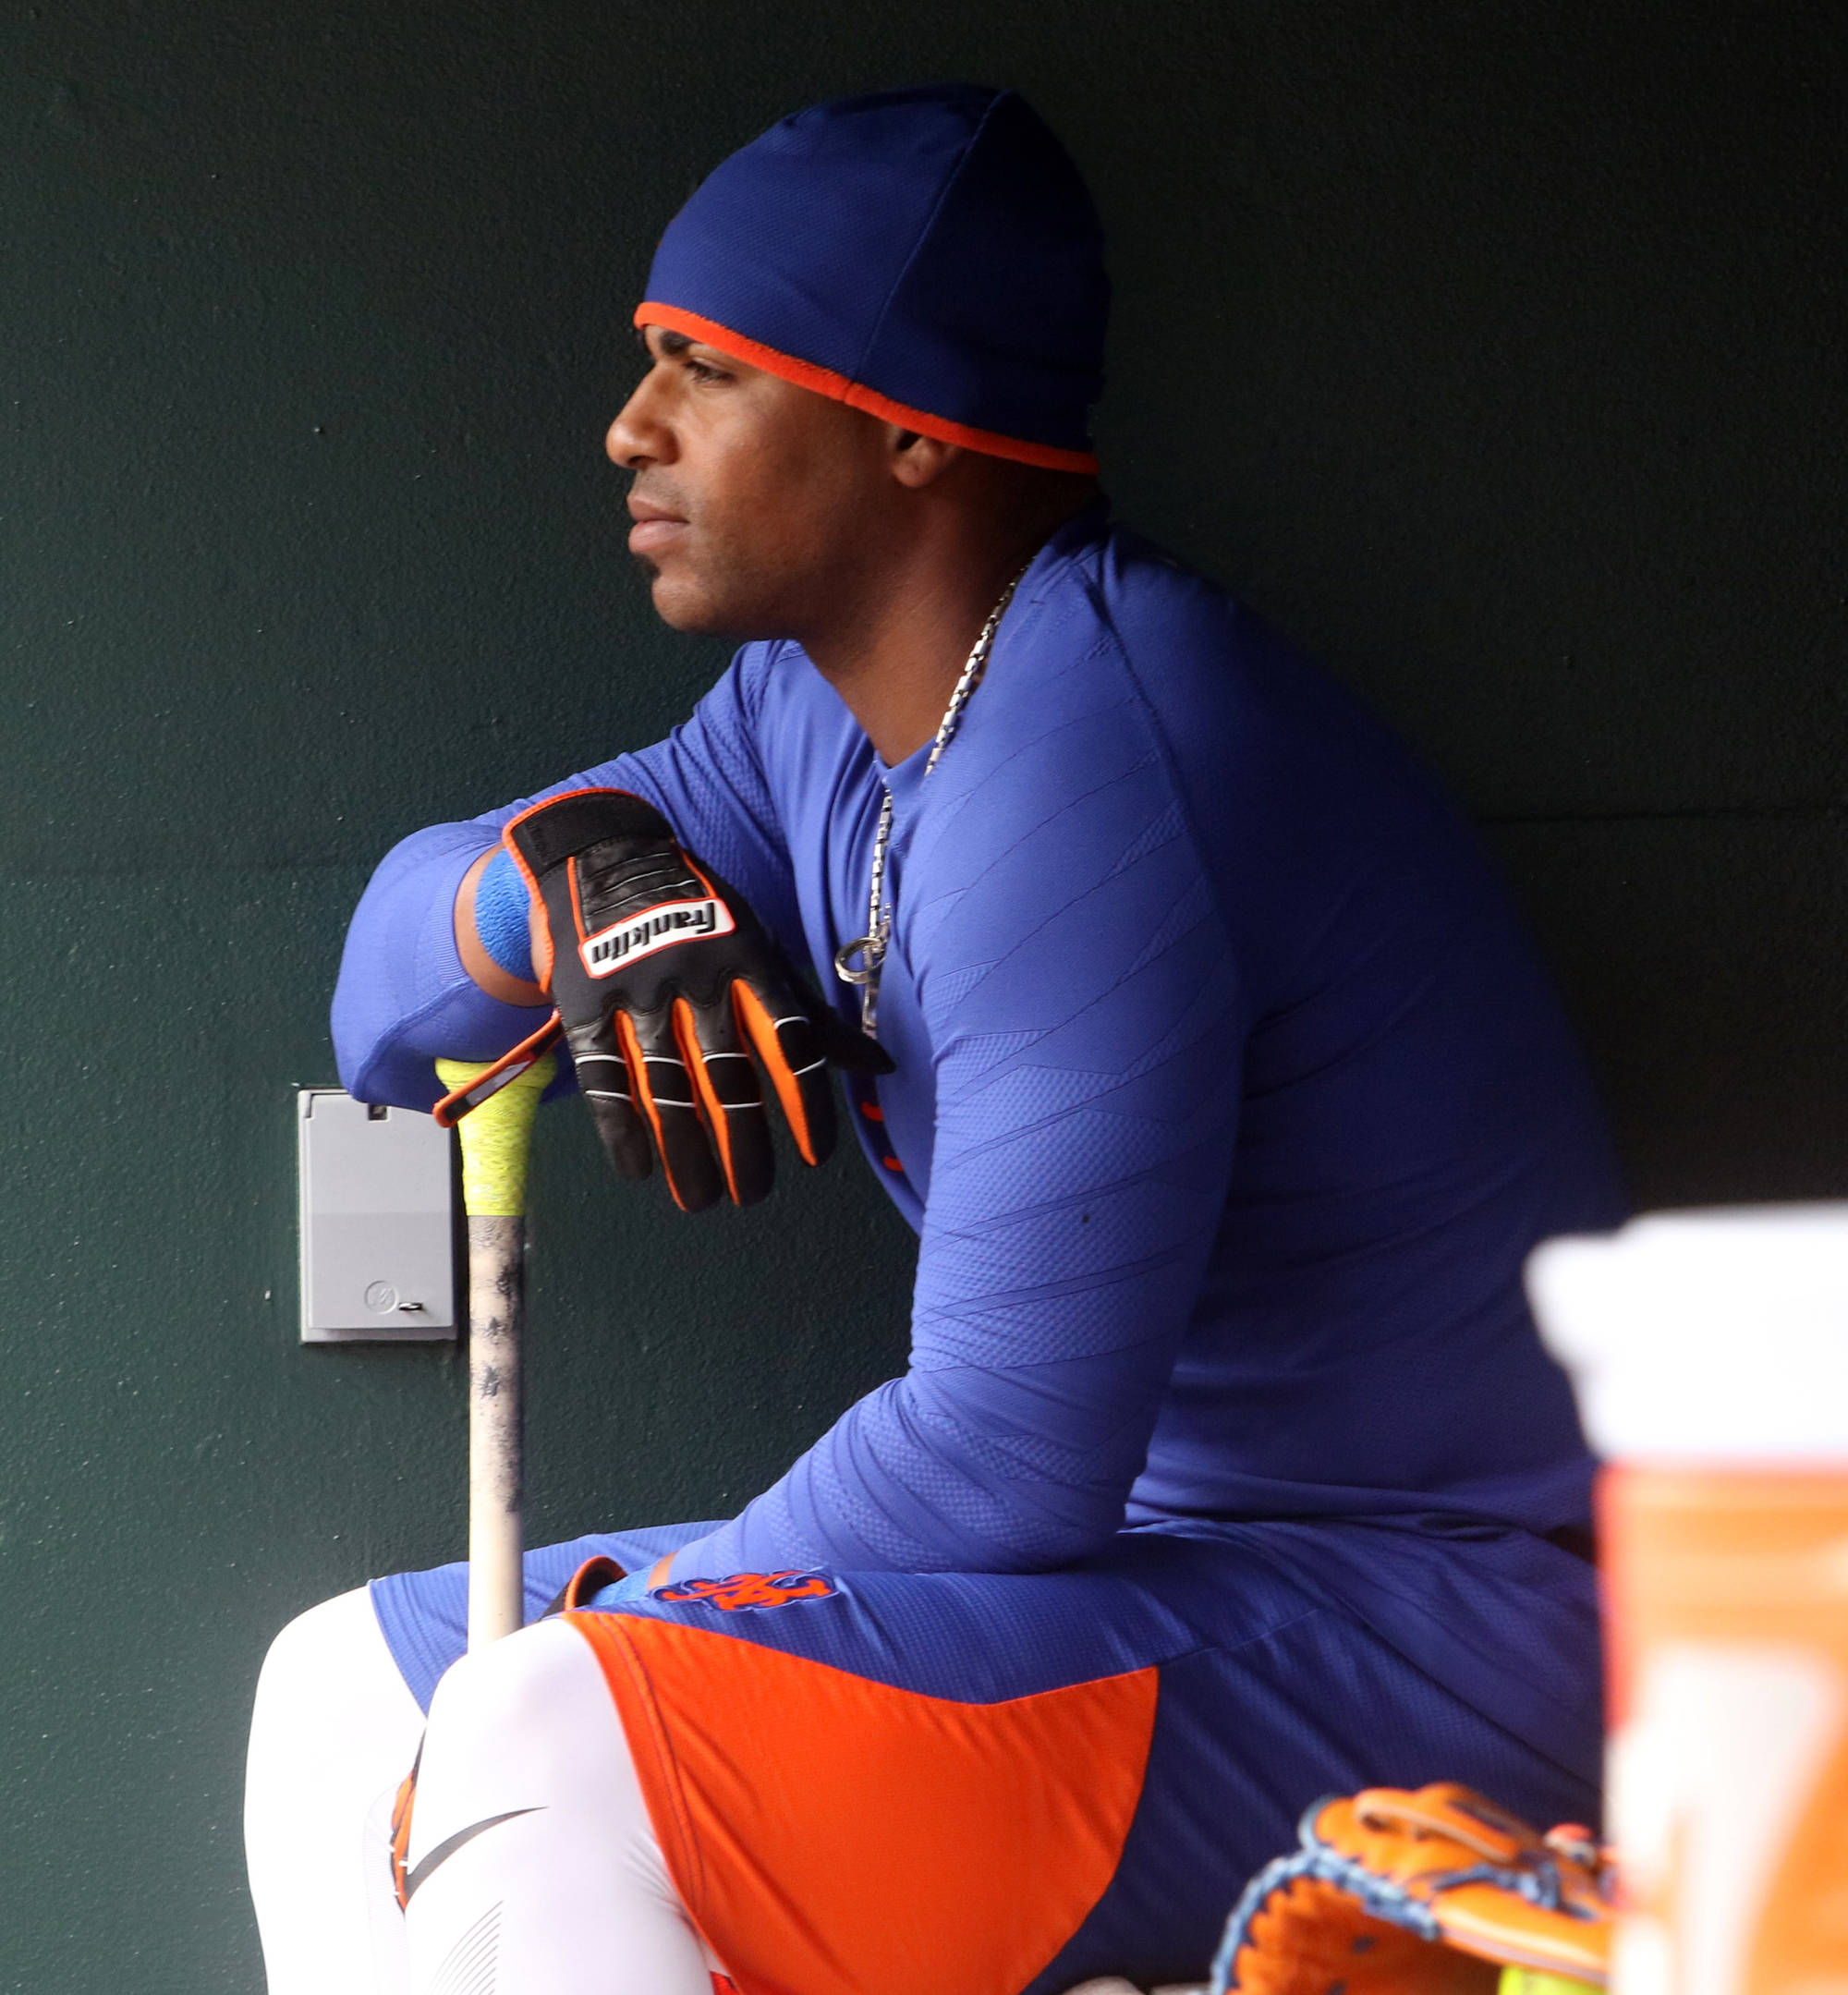 Yoenis Cespedes to the Giants?